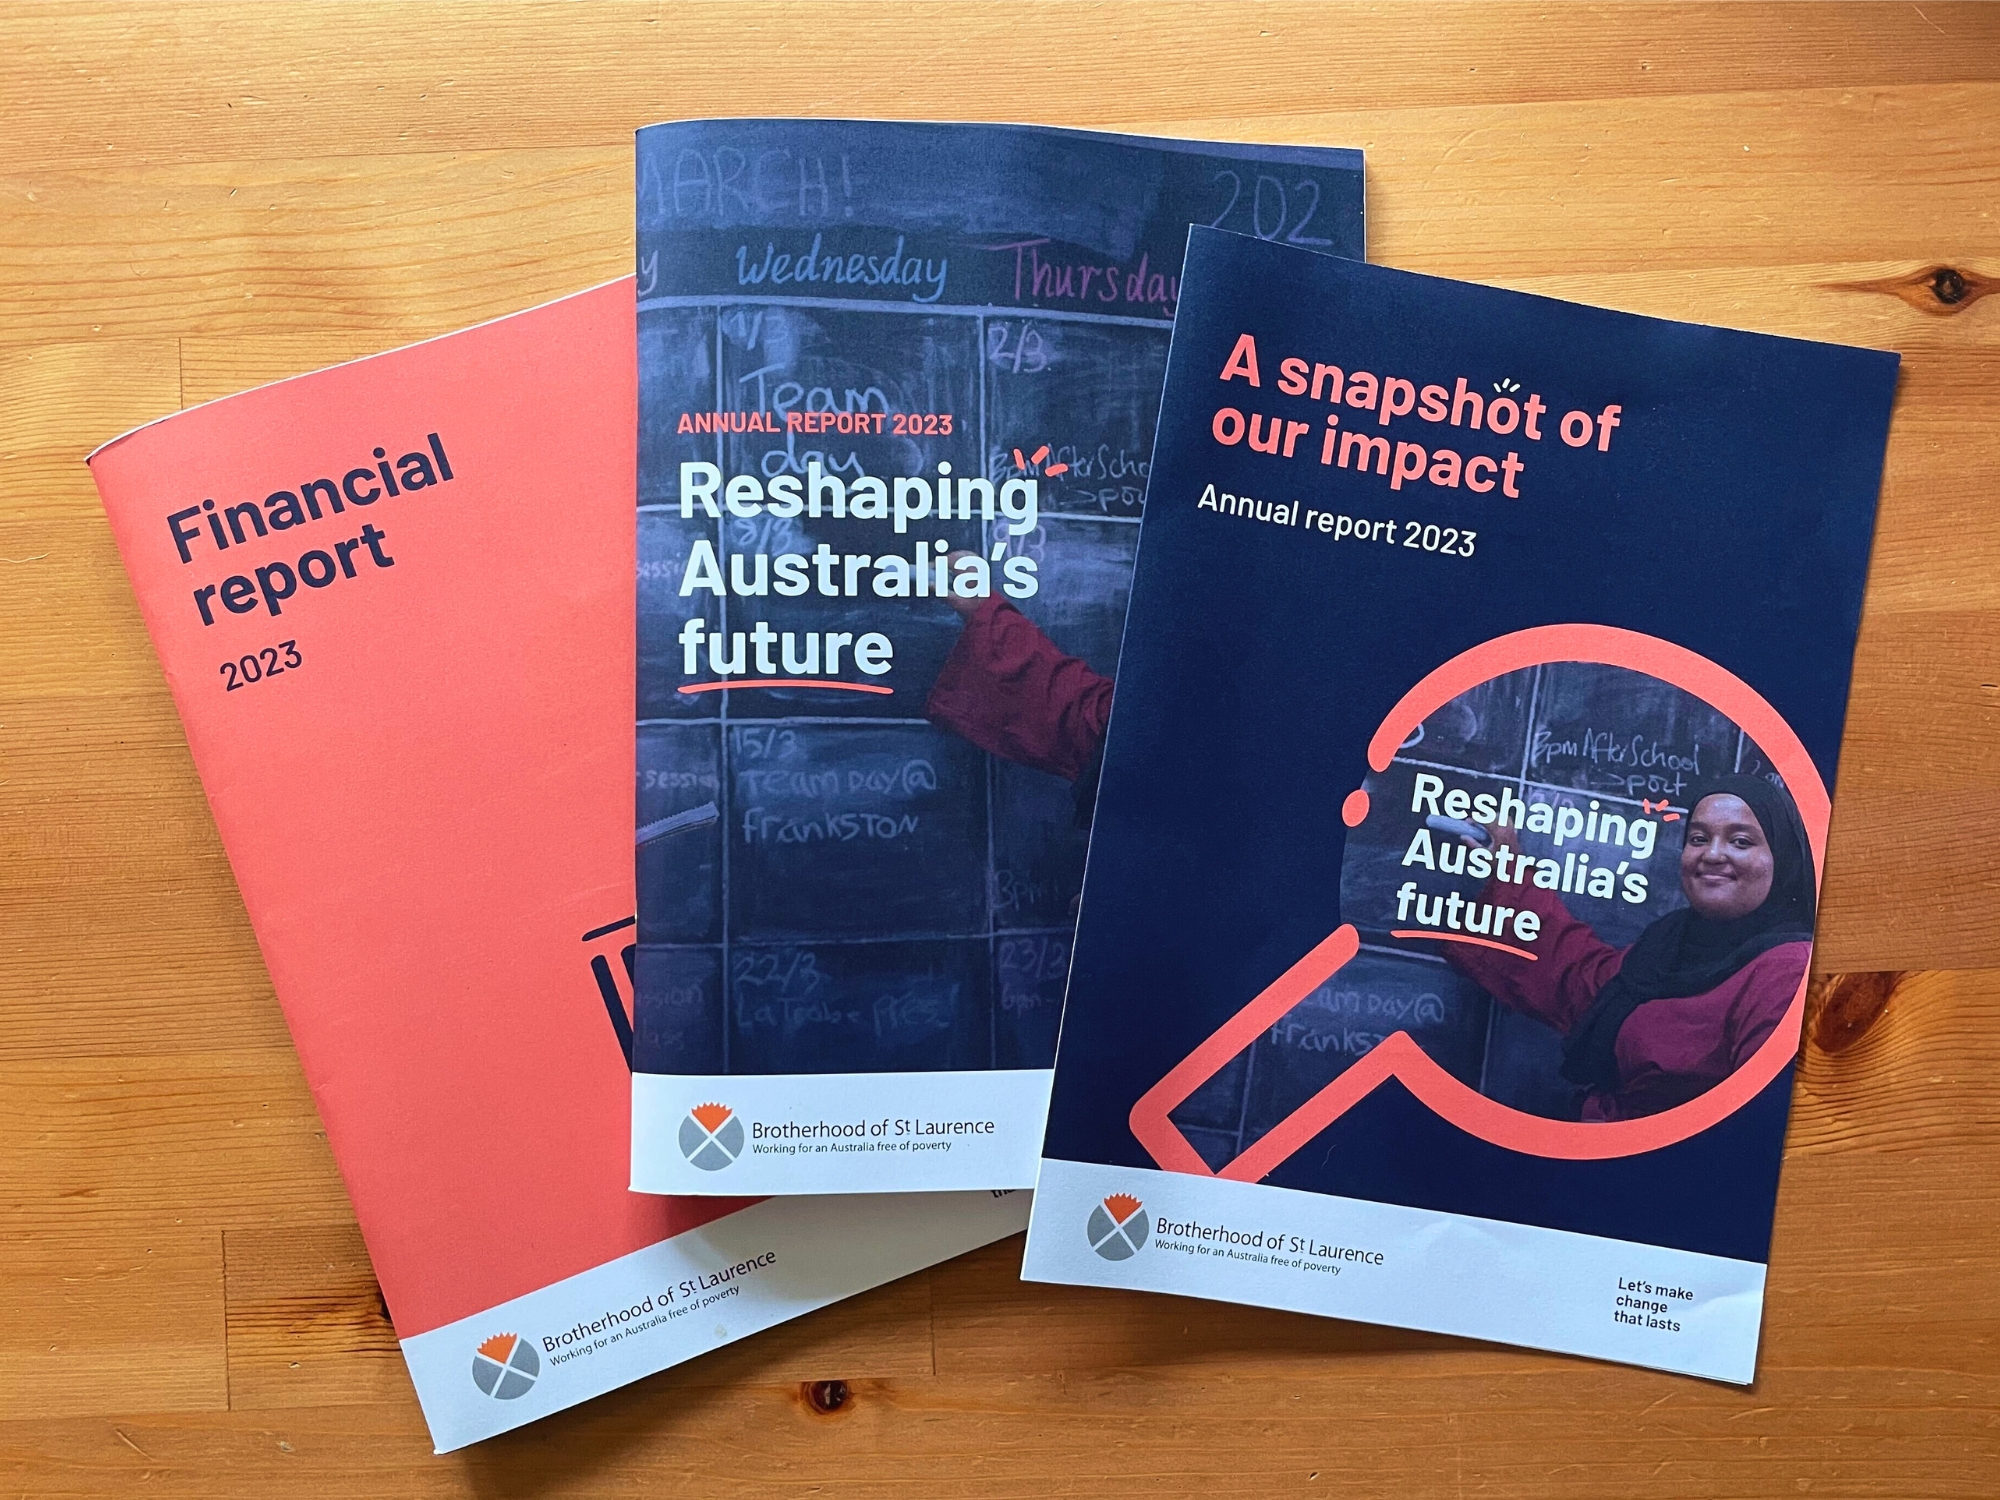 Real photograph of Brotherhood of St. Laurence (BSL) Annual reports 2023, including Financial report, full print report titled "Reshaping Australia's future", and summary brochure titled "A snapshot of our impact".